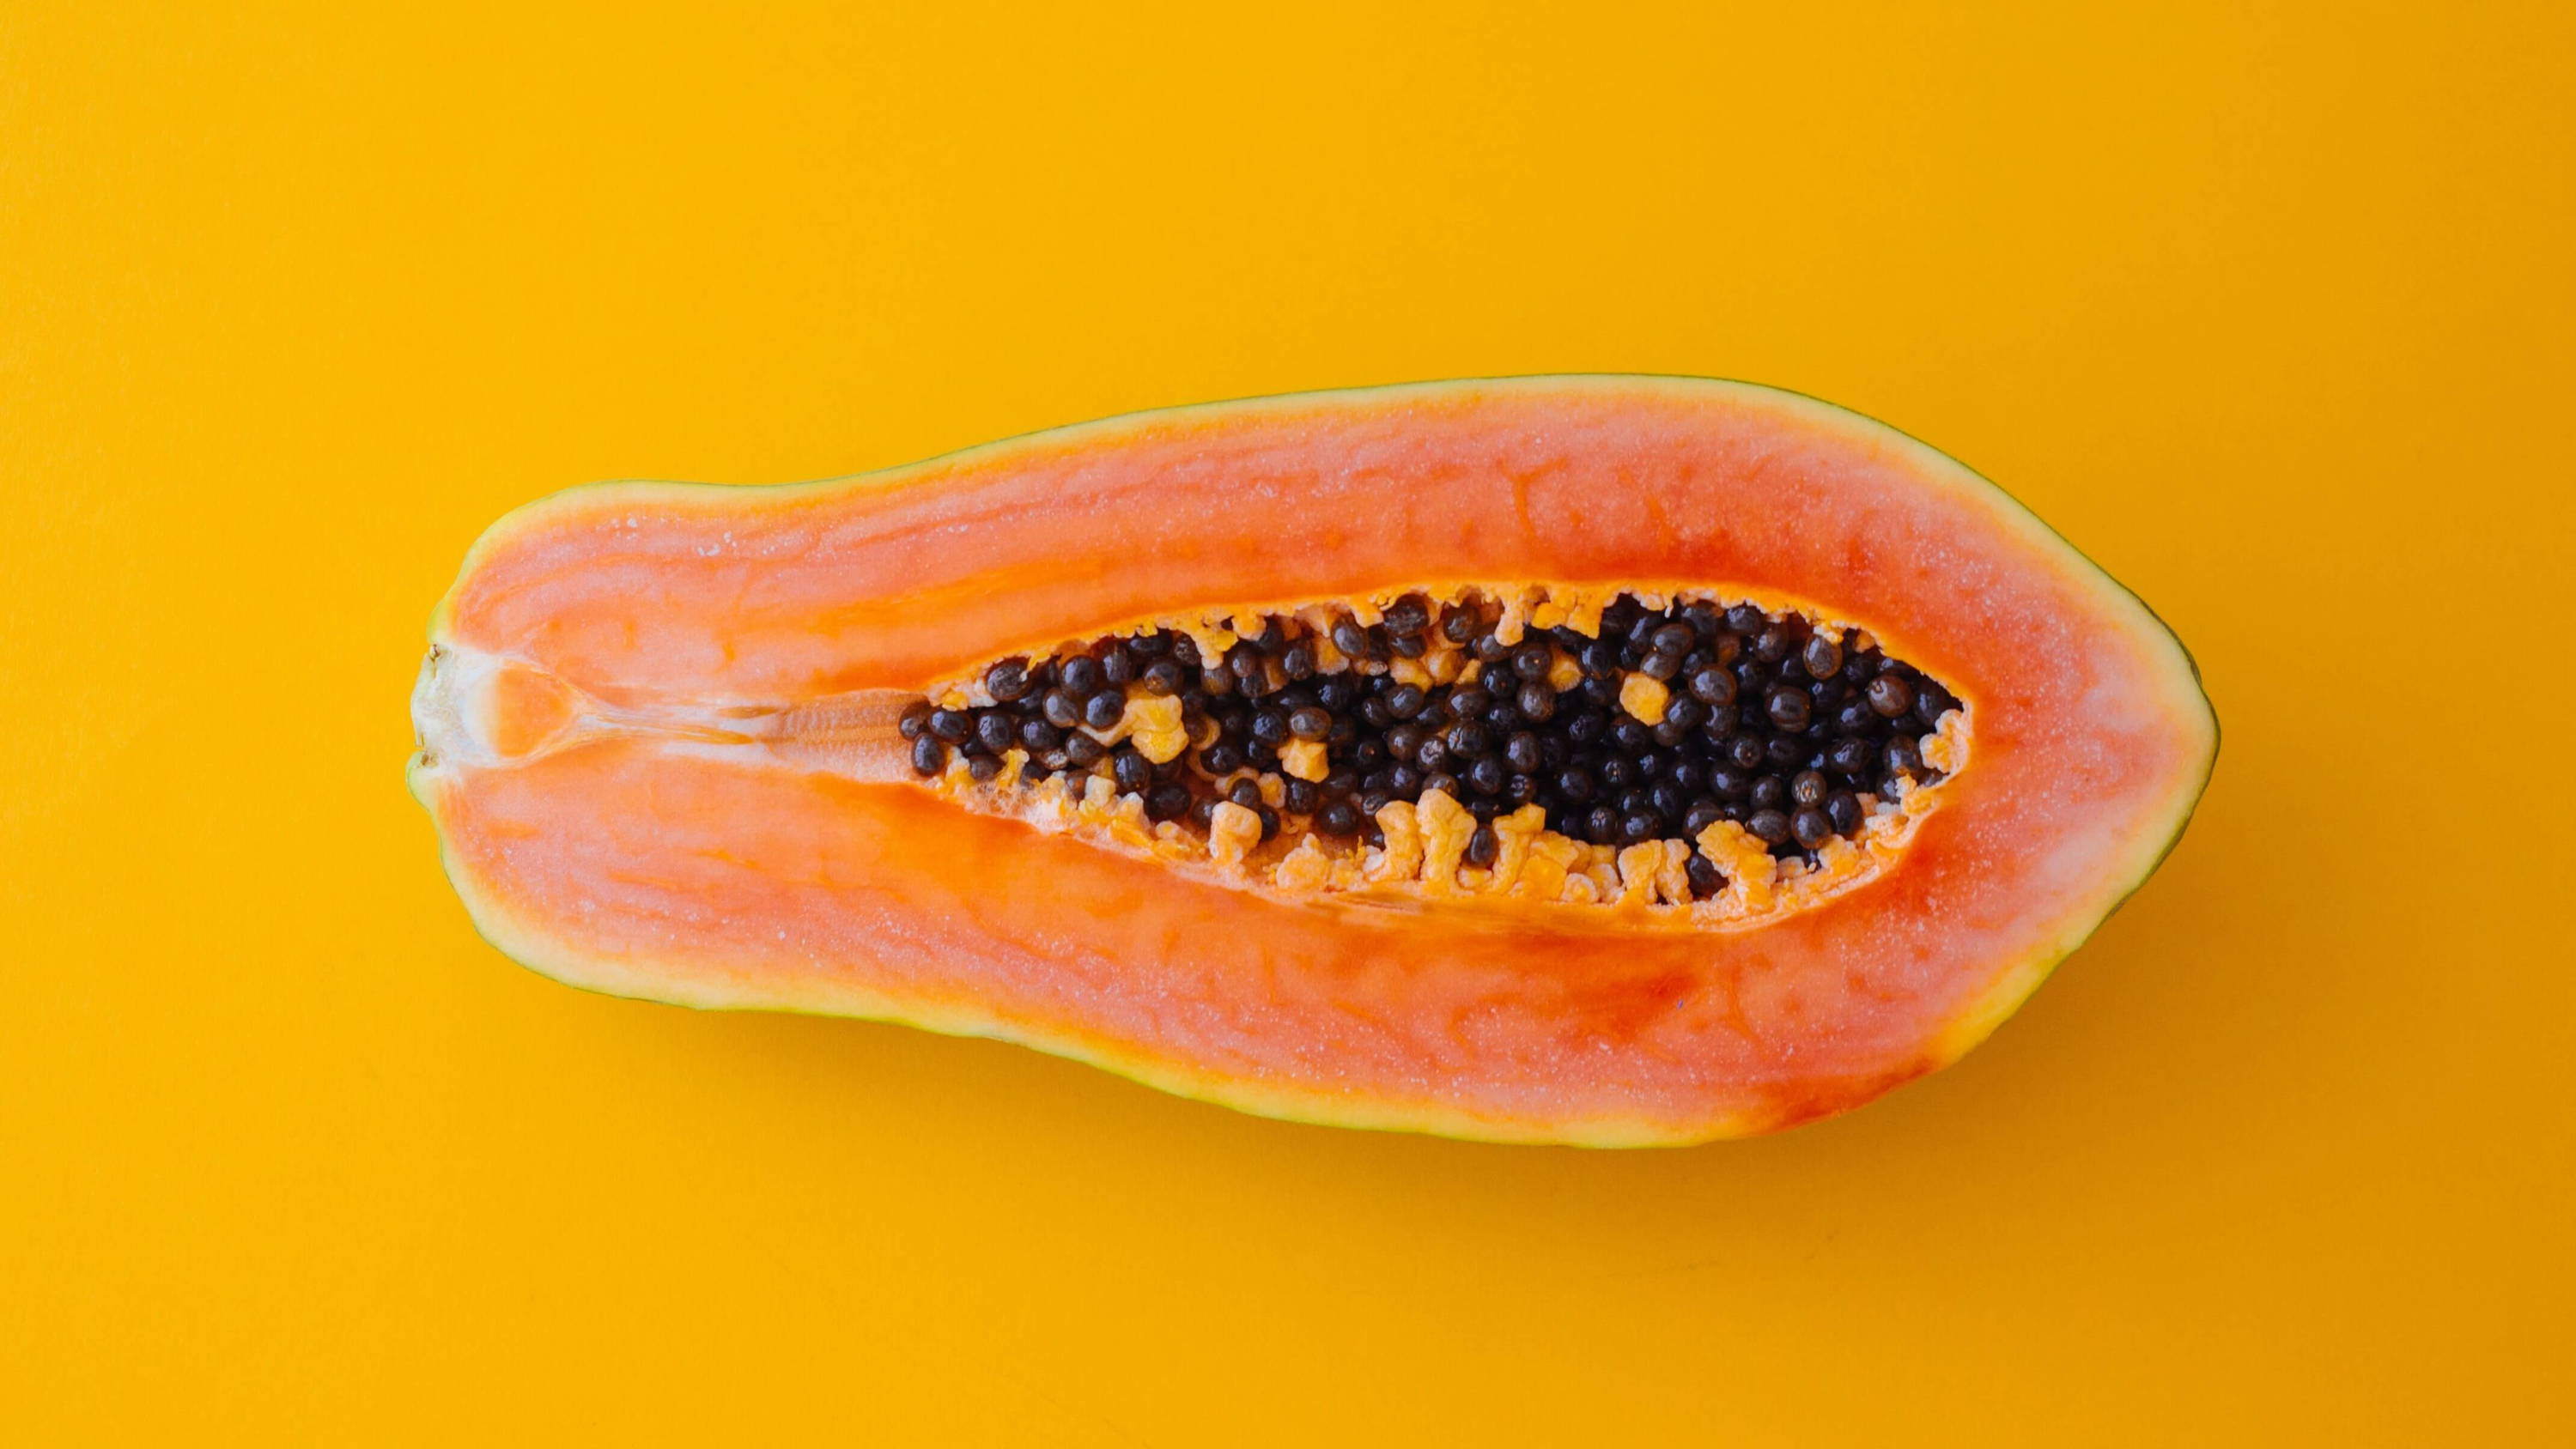 a halved papaya against a golden yellow background.